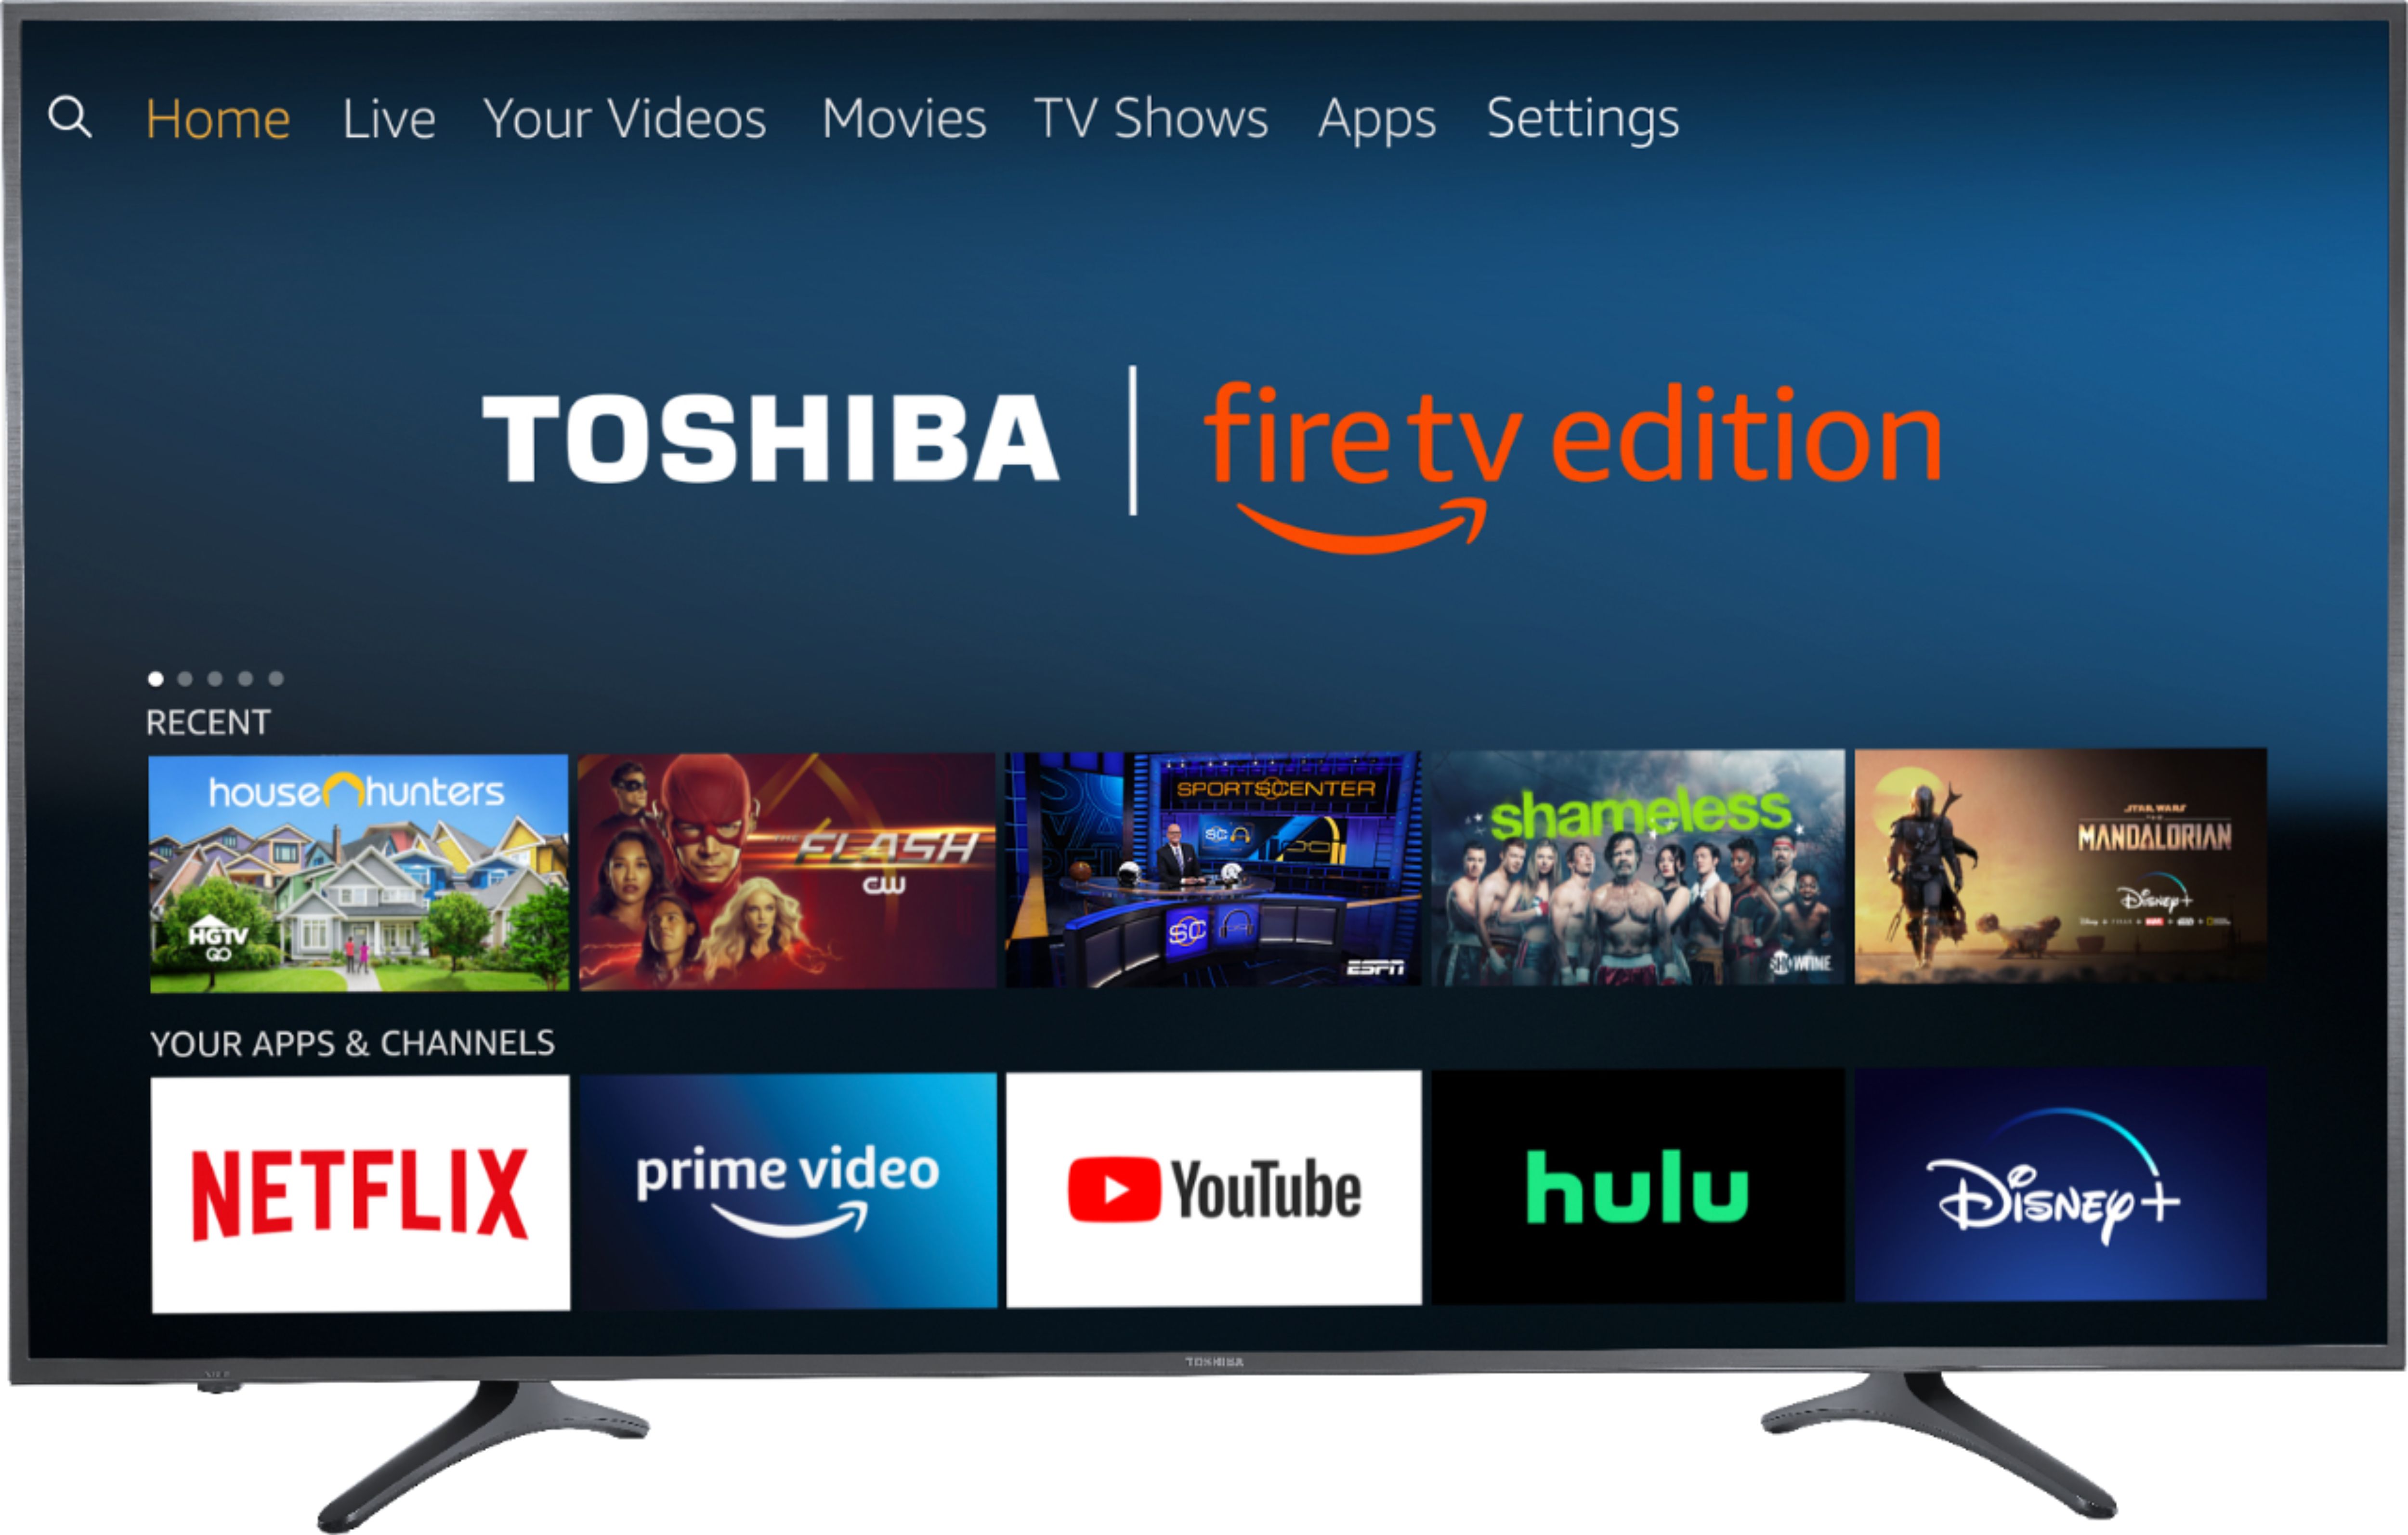 Toshiba - 65" Class - LED - 2160p - Smart - 4K UHD TV with HDR - Fire TV Edition $380